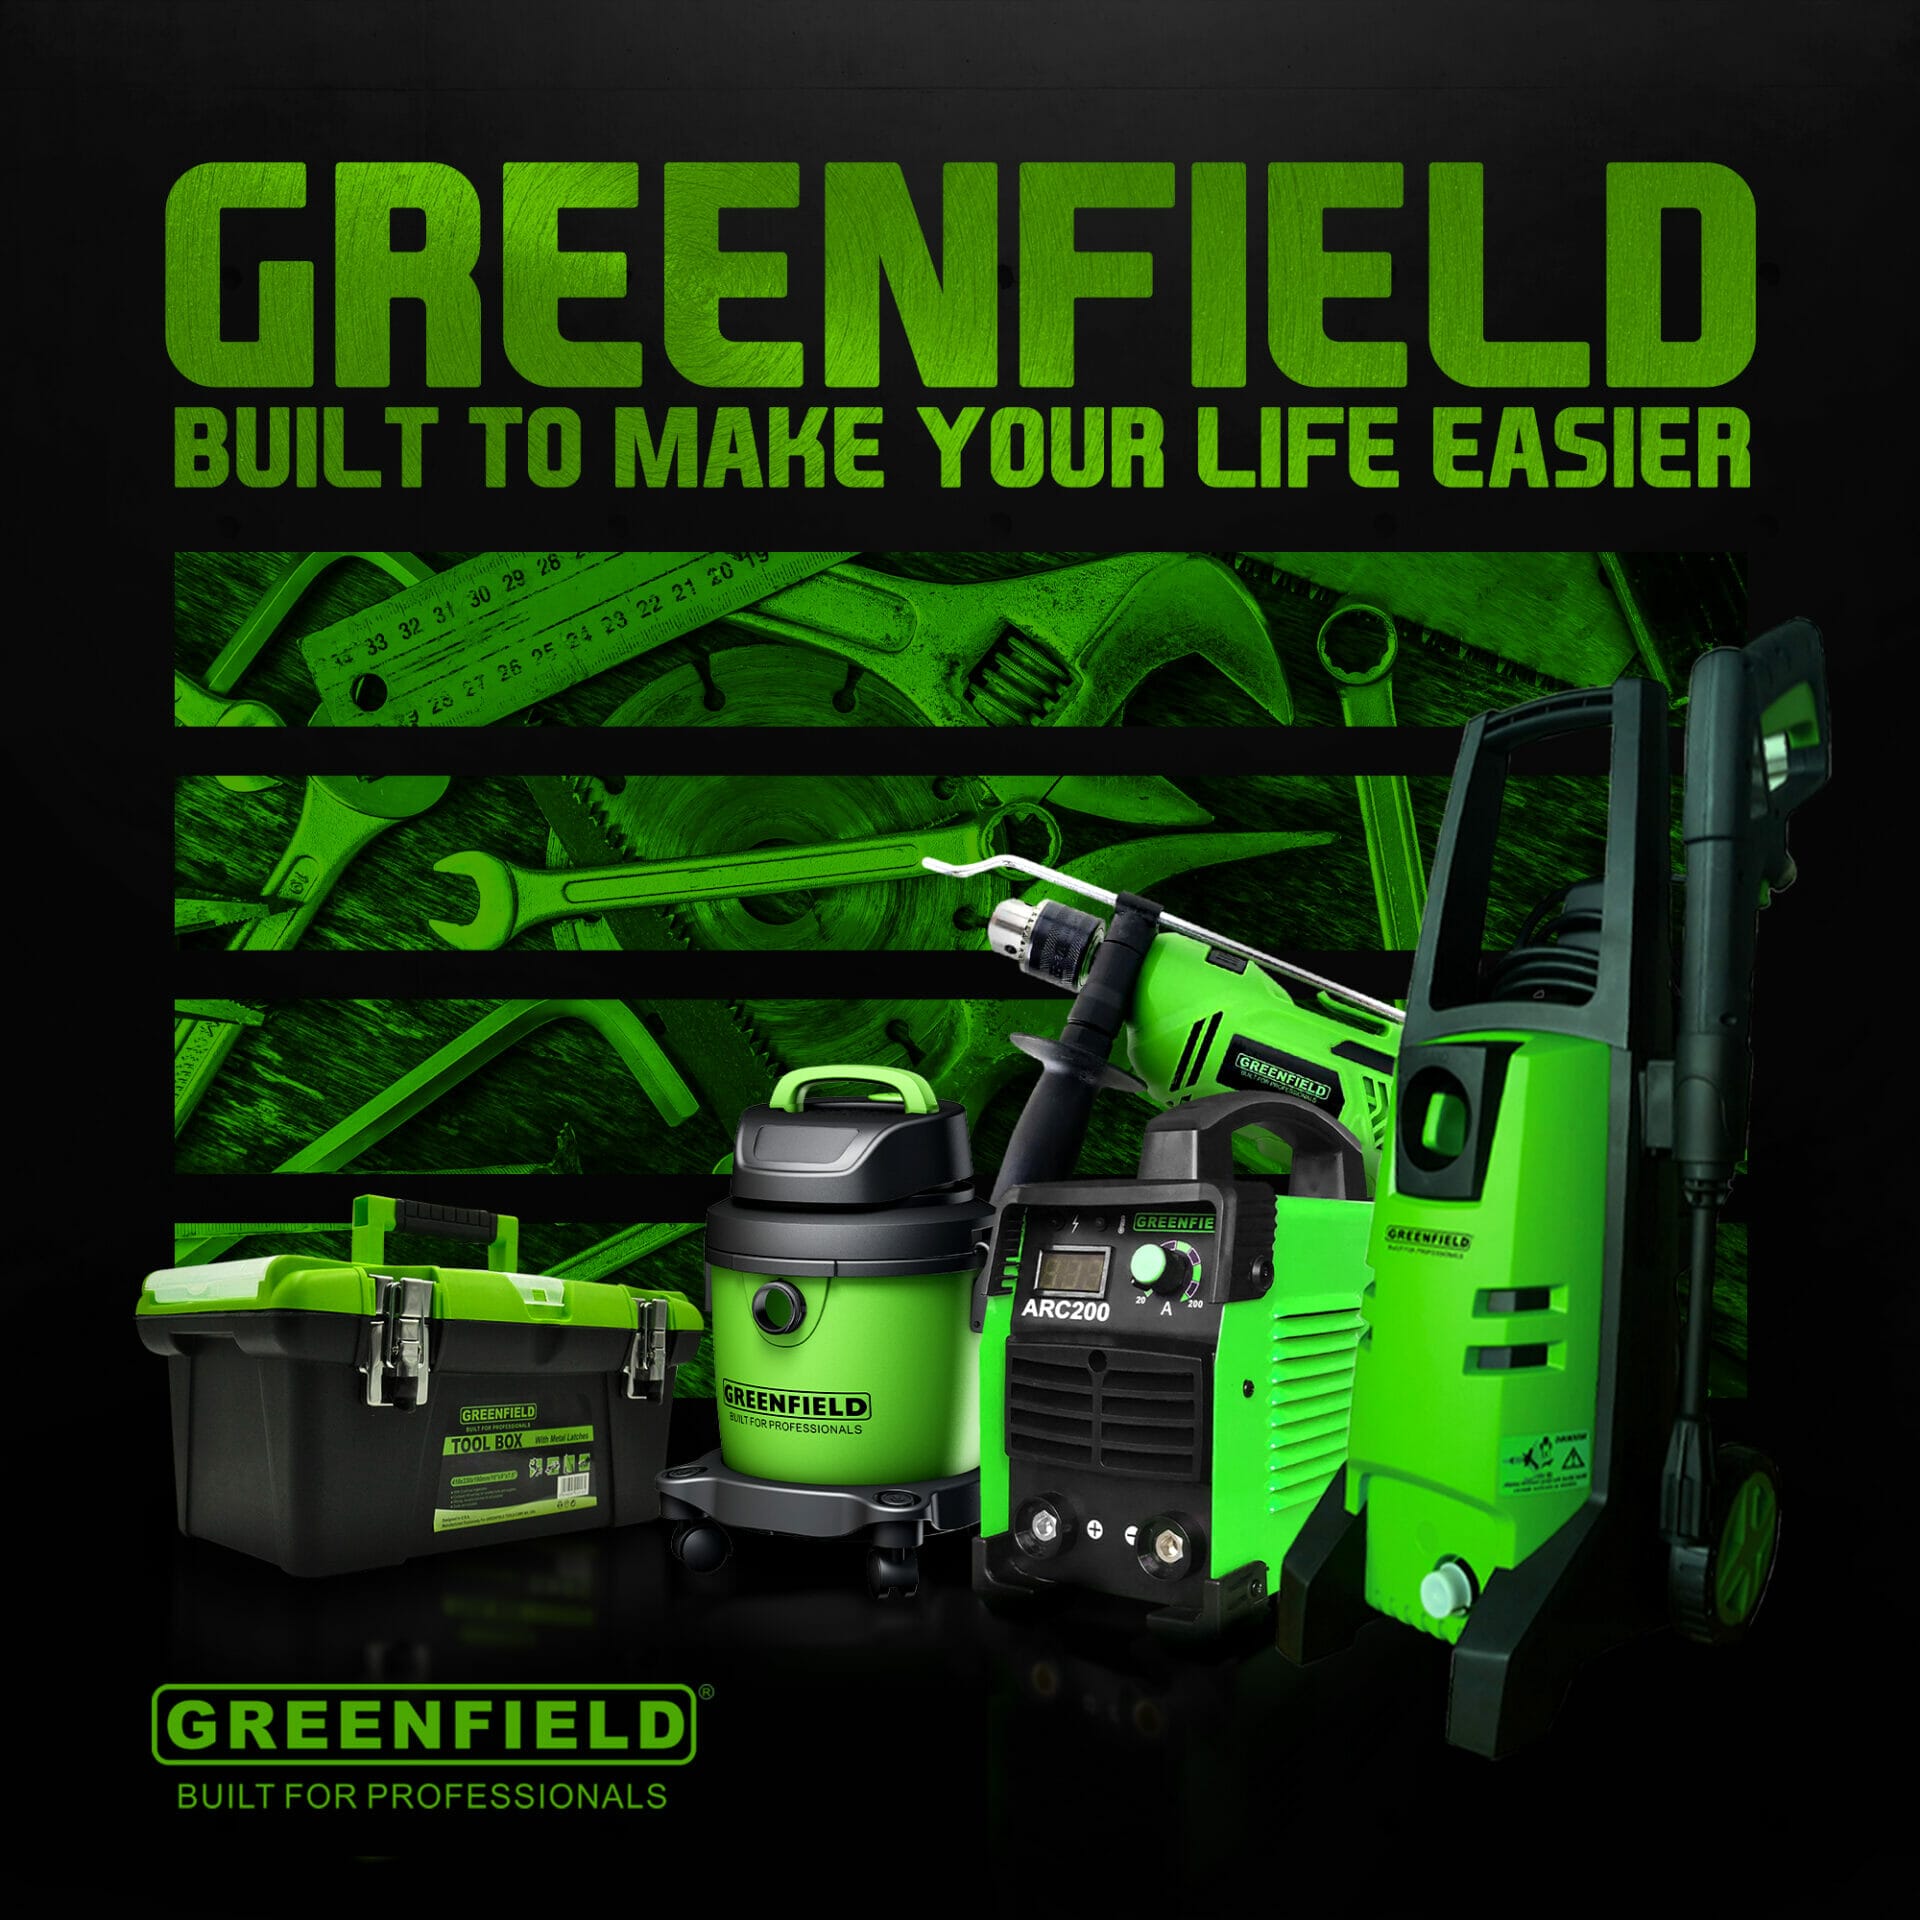 Greenfield built to make your life easier.